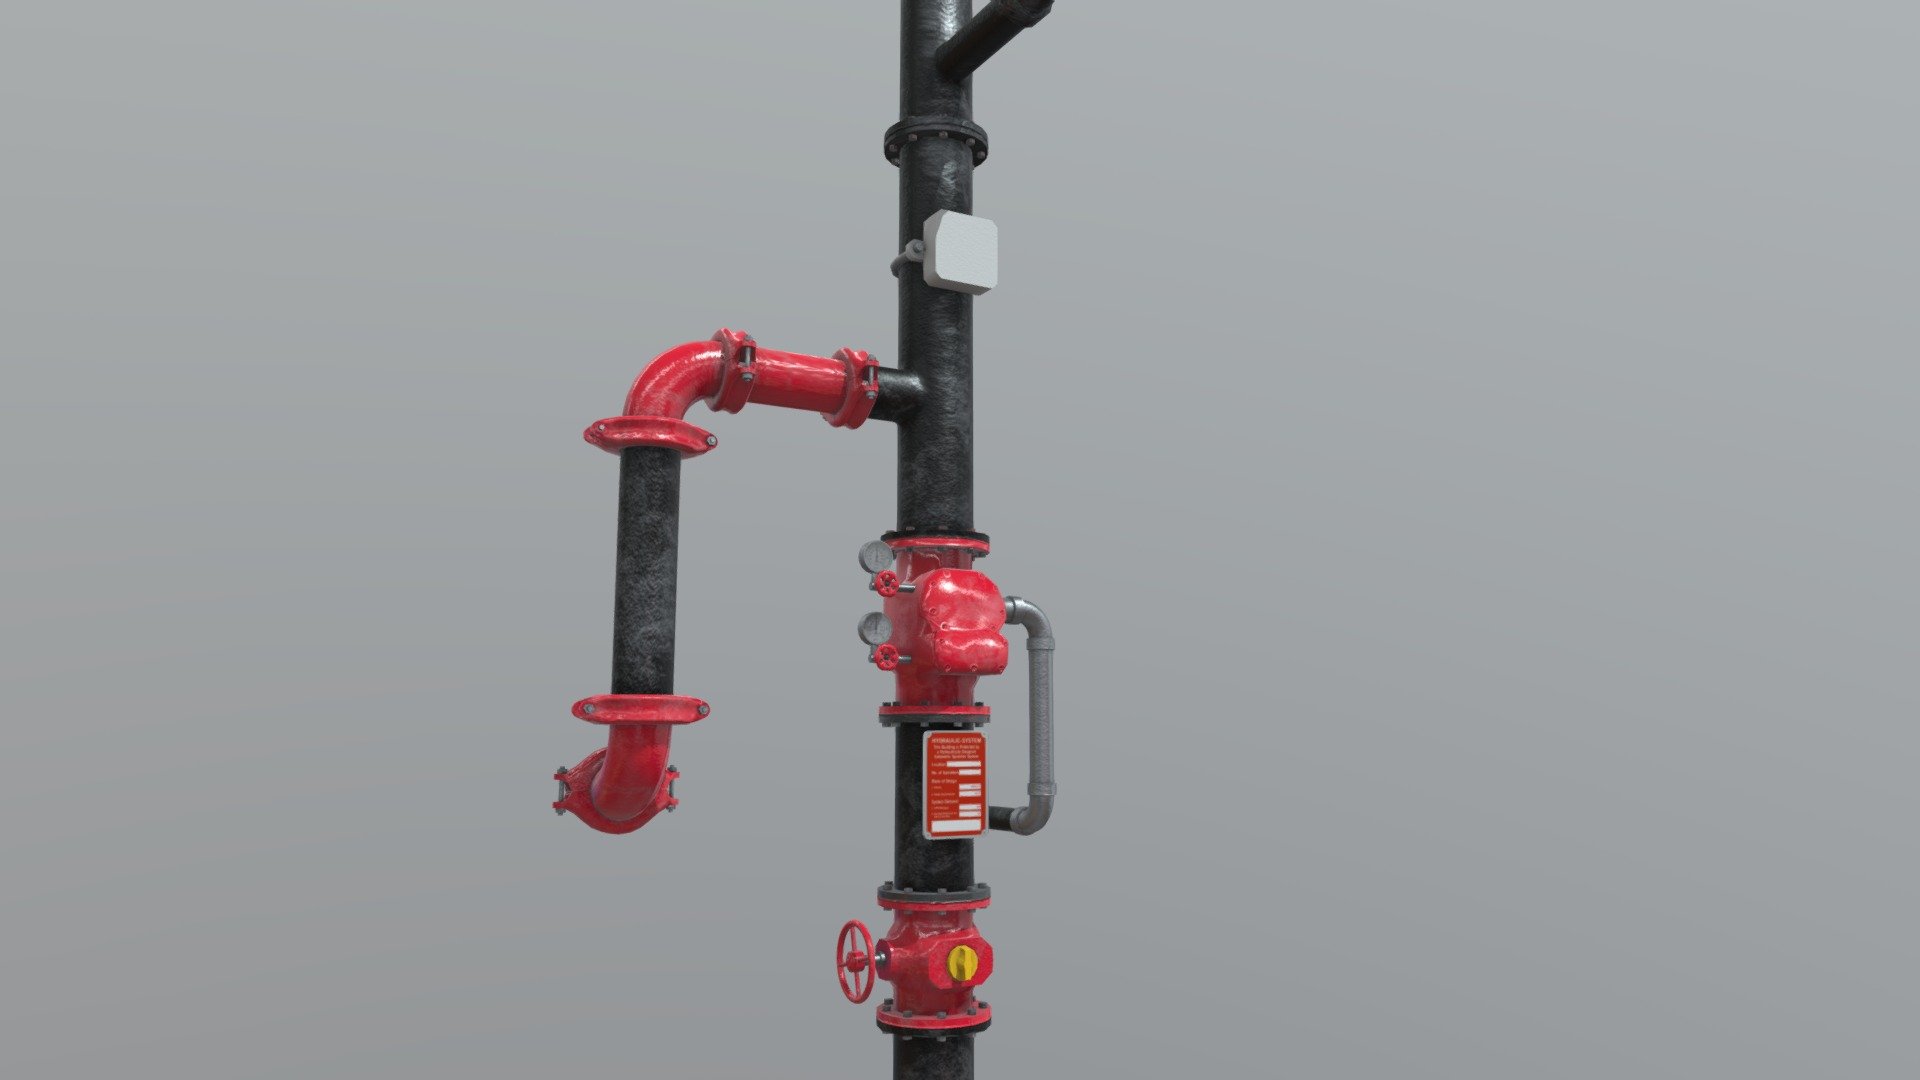 sprinkler riser for fire suppresion system featuring a modular set of metal pipes and fittings - Sprinkler Riser Pipe Assembly - Buy Royalty Free 3D model by BradleyLewis 3d model